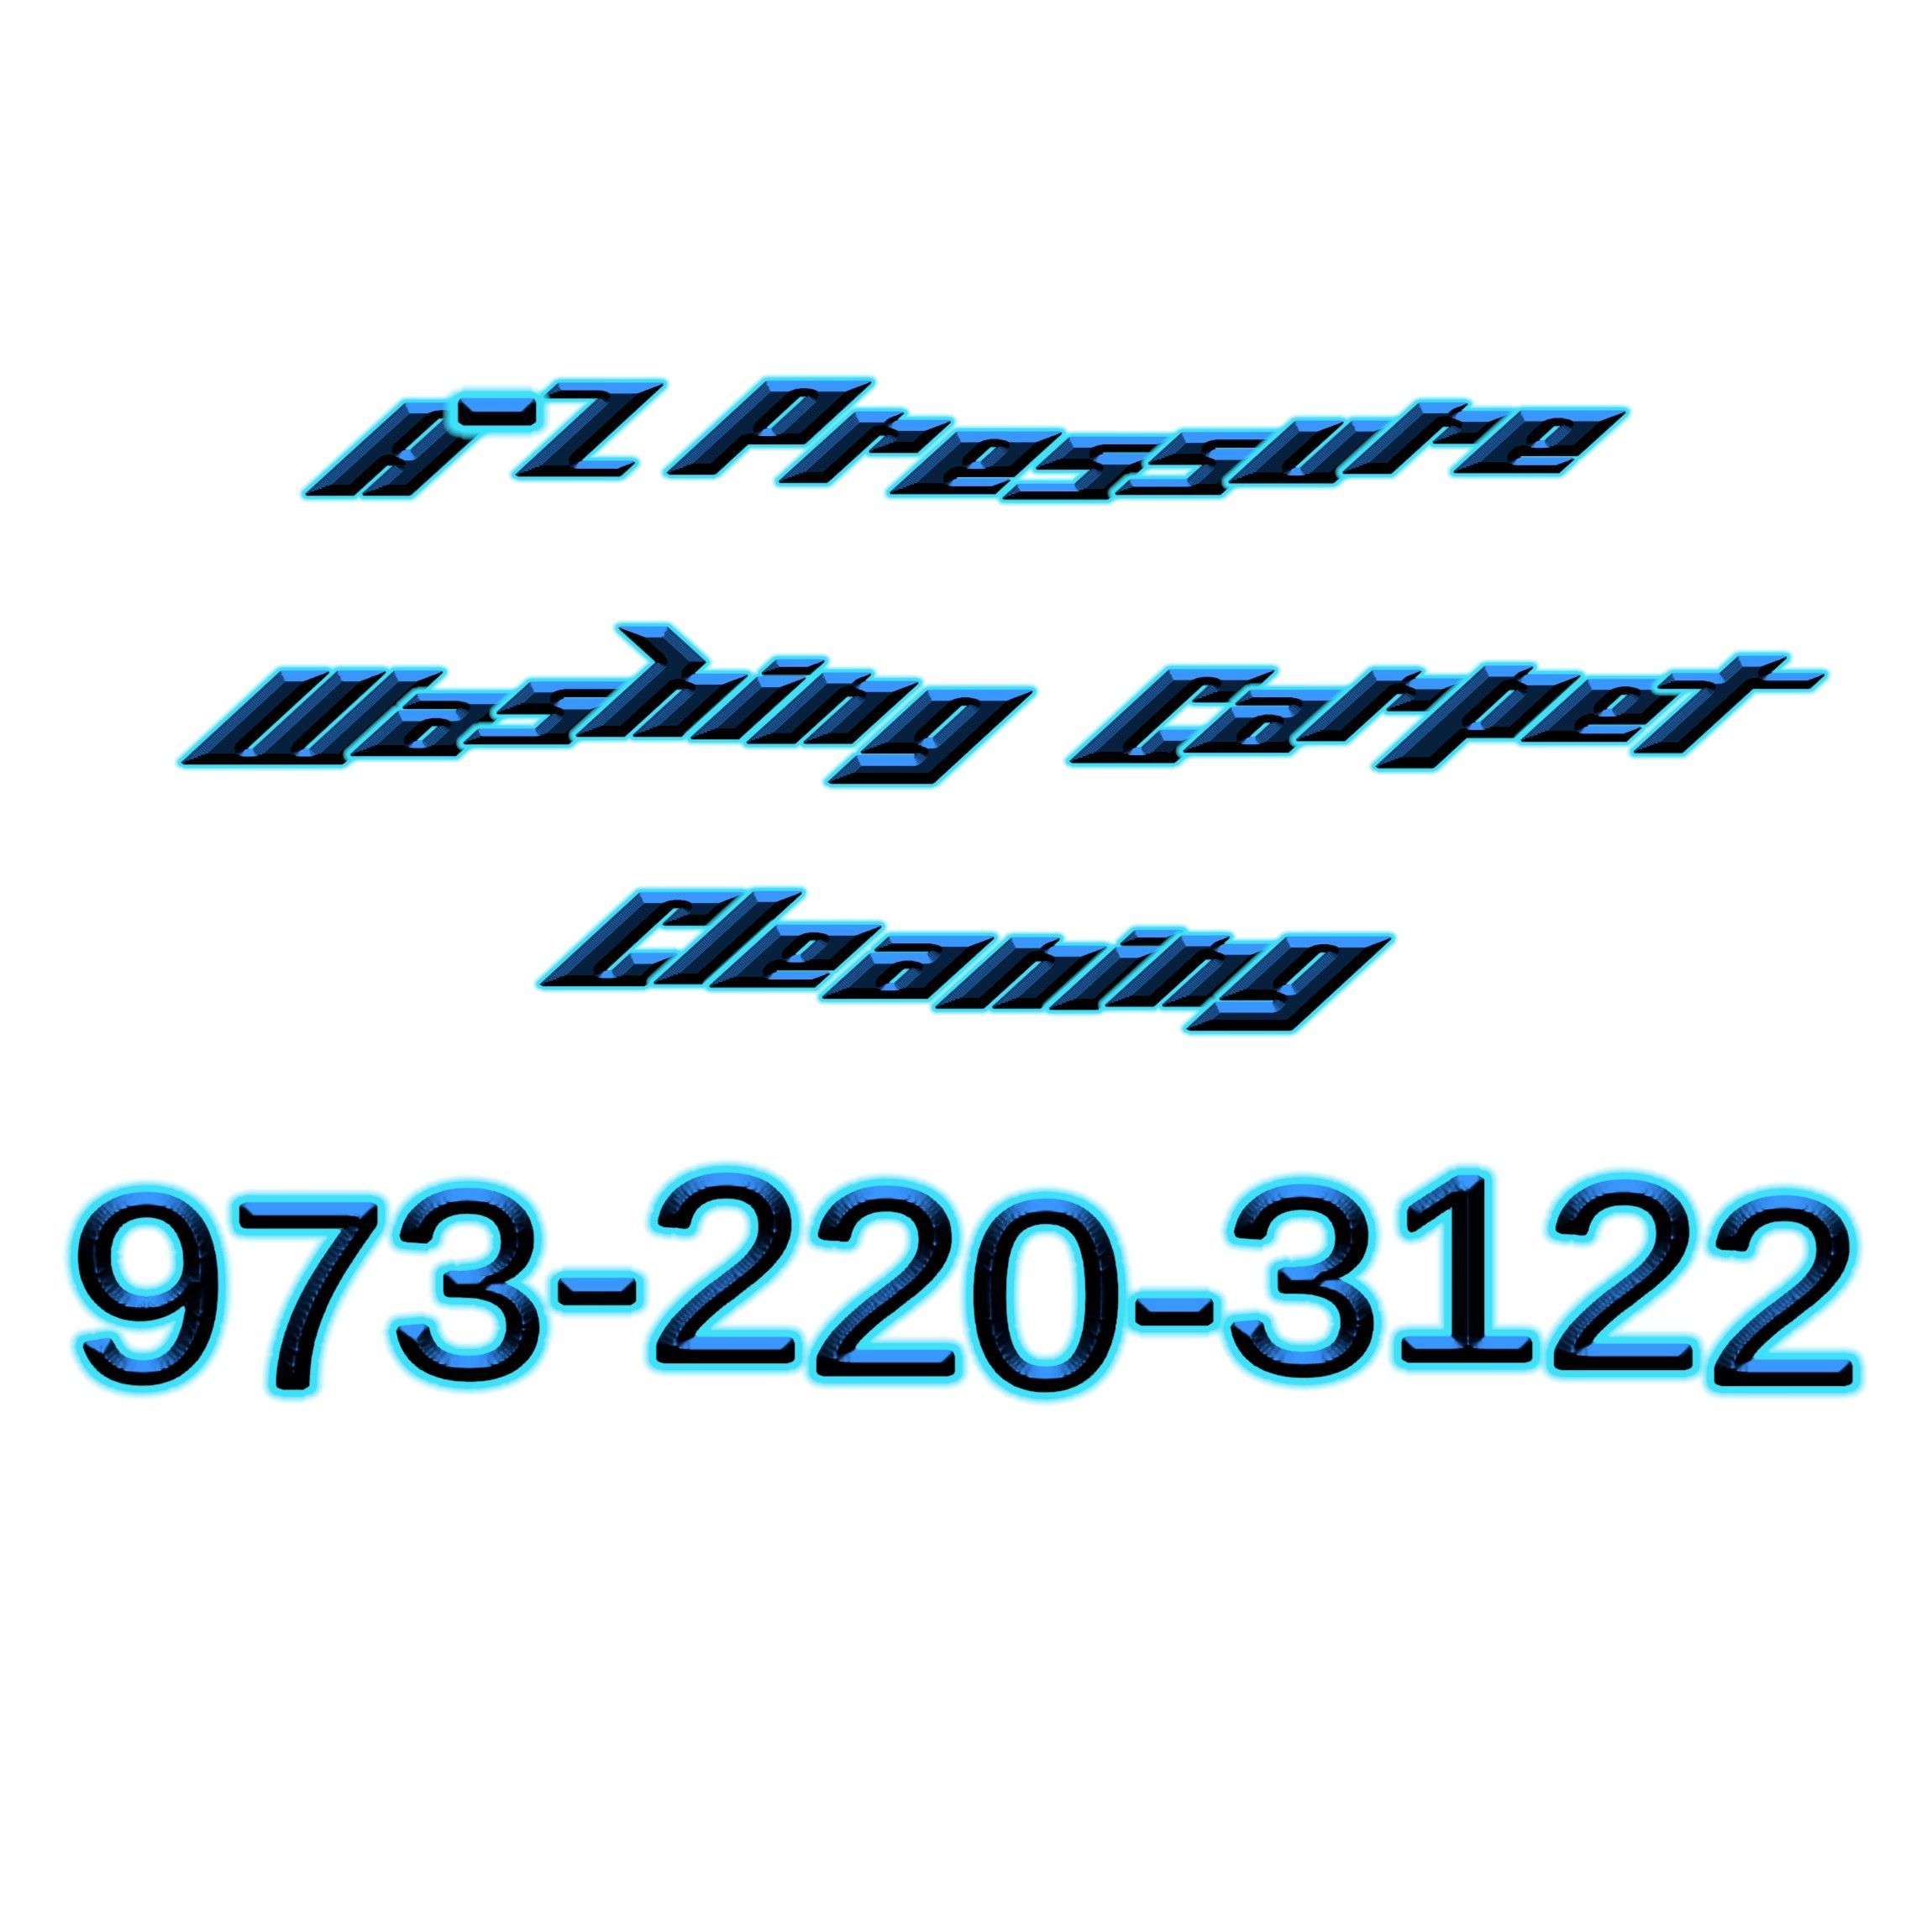 A-Z Pressure Washing Carpet Cleaning, Myrtle Beach, 29579